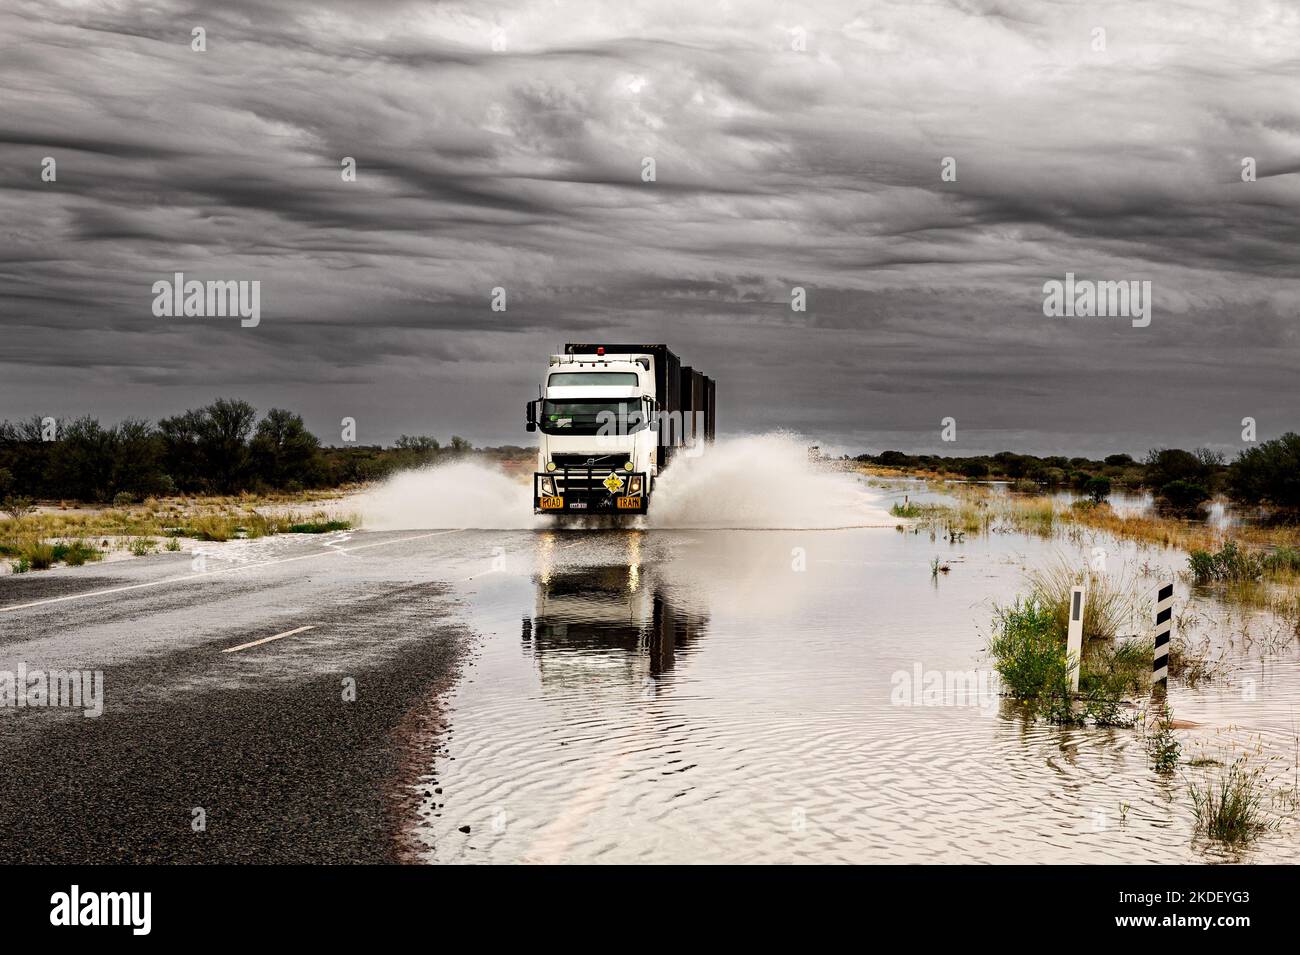 Road Train on a flooded Great Northern Highway in Australia's Outback. Stock Photo